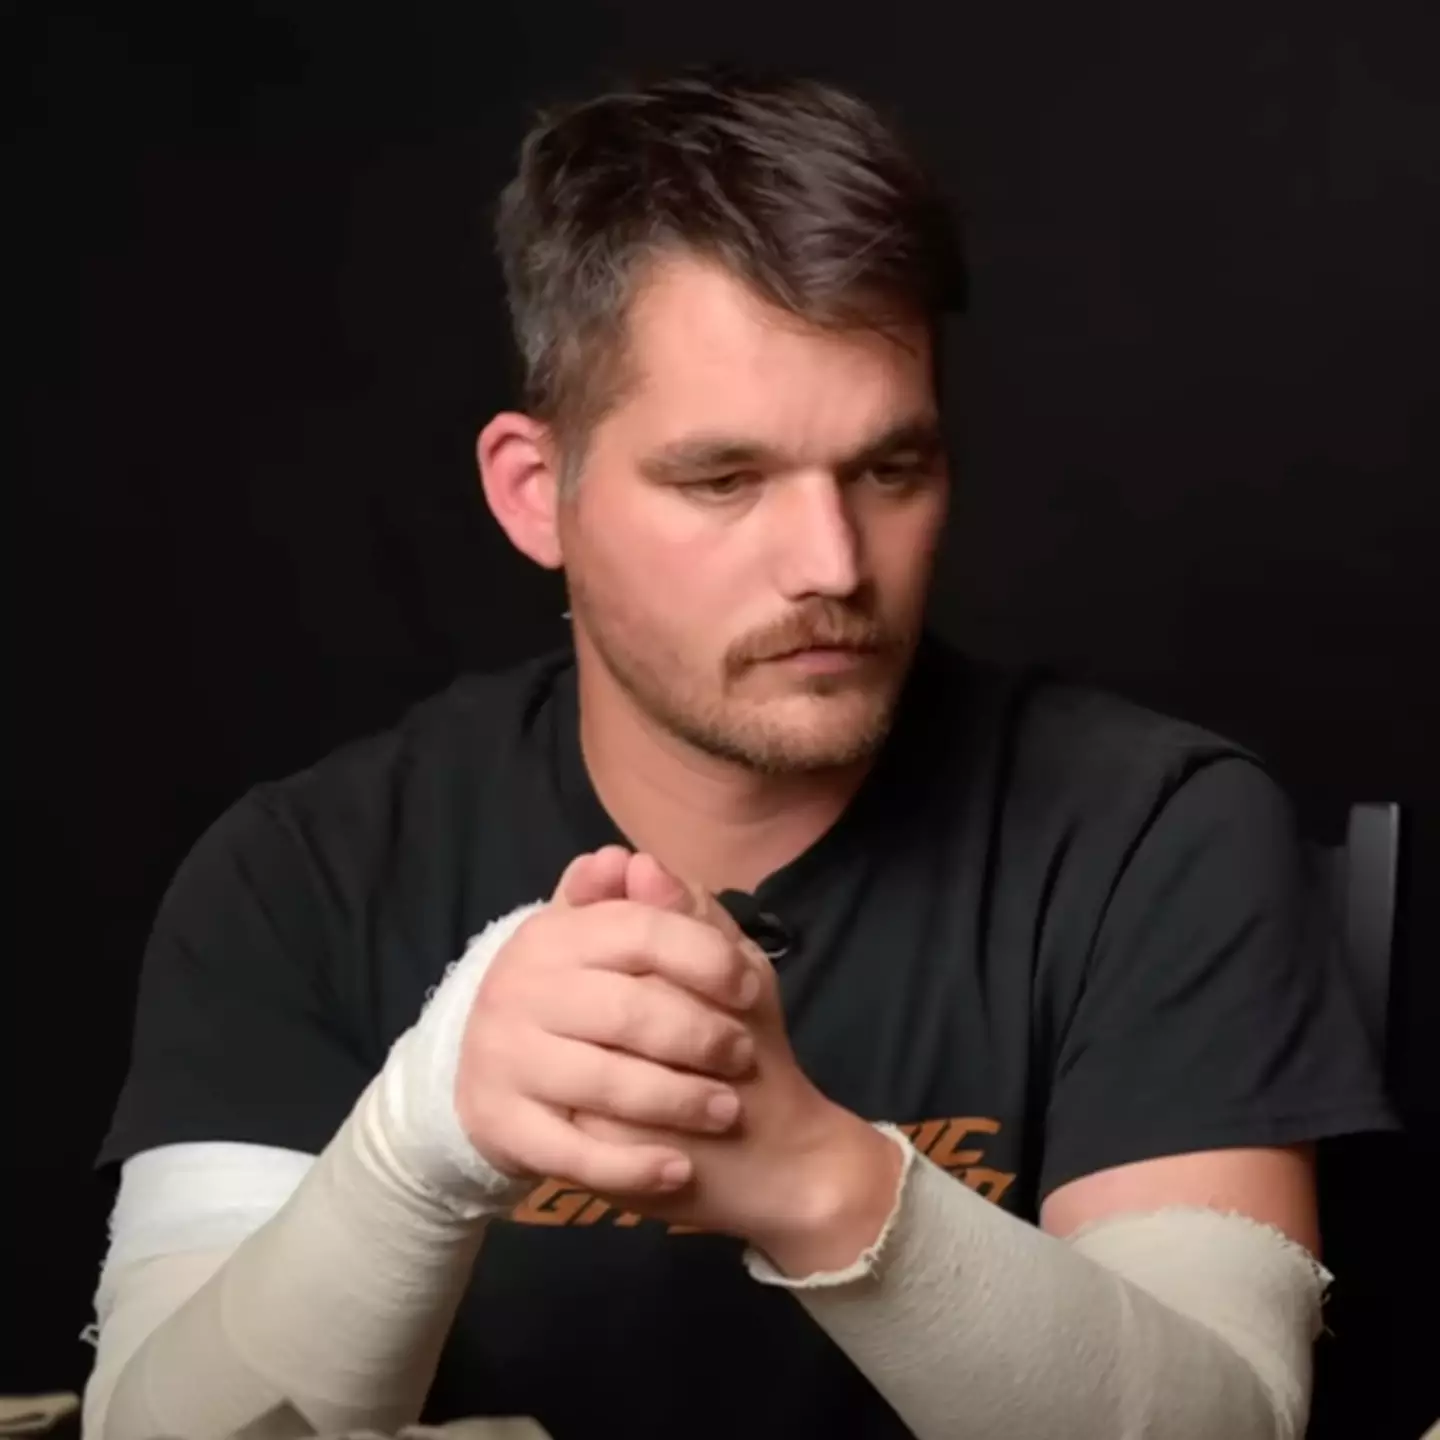 Man injured in rocket launcher explosion speaks out on the horrifying experience